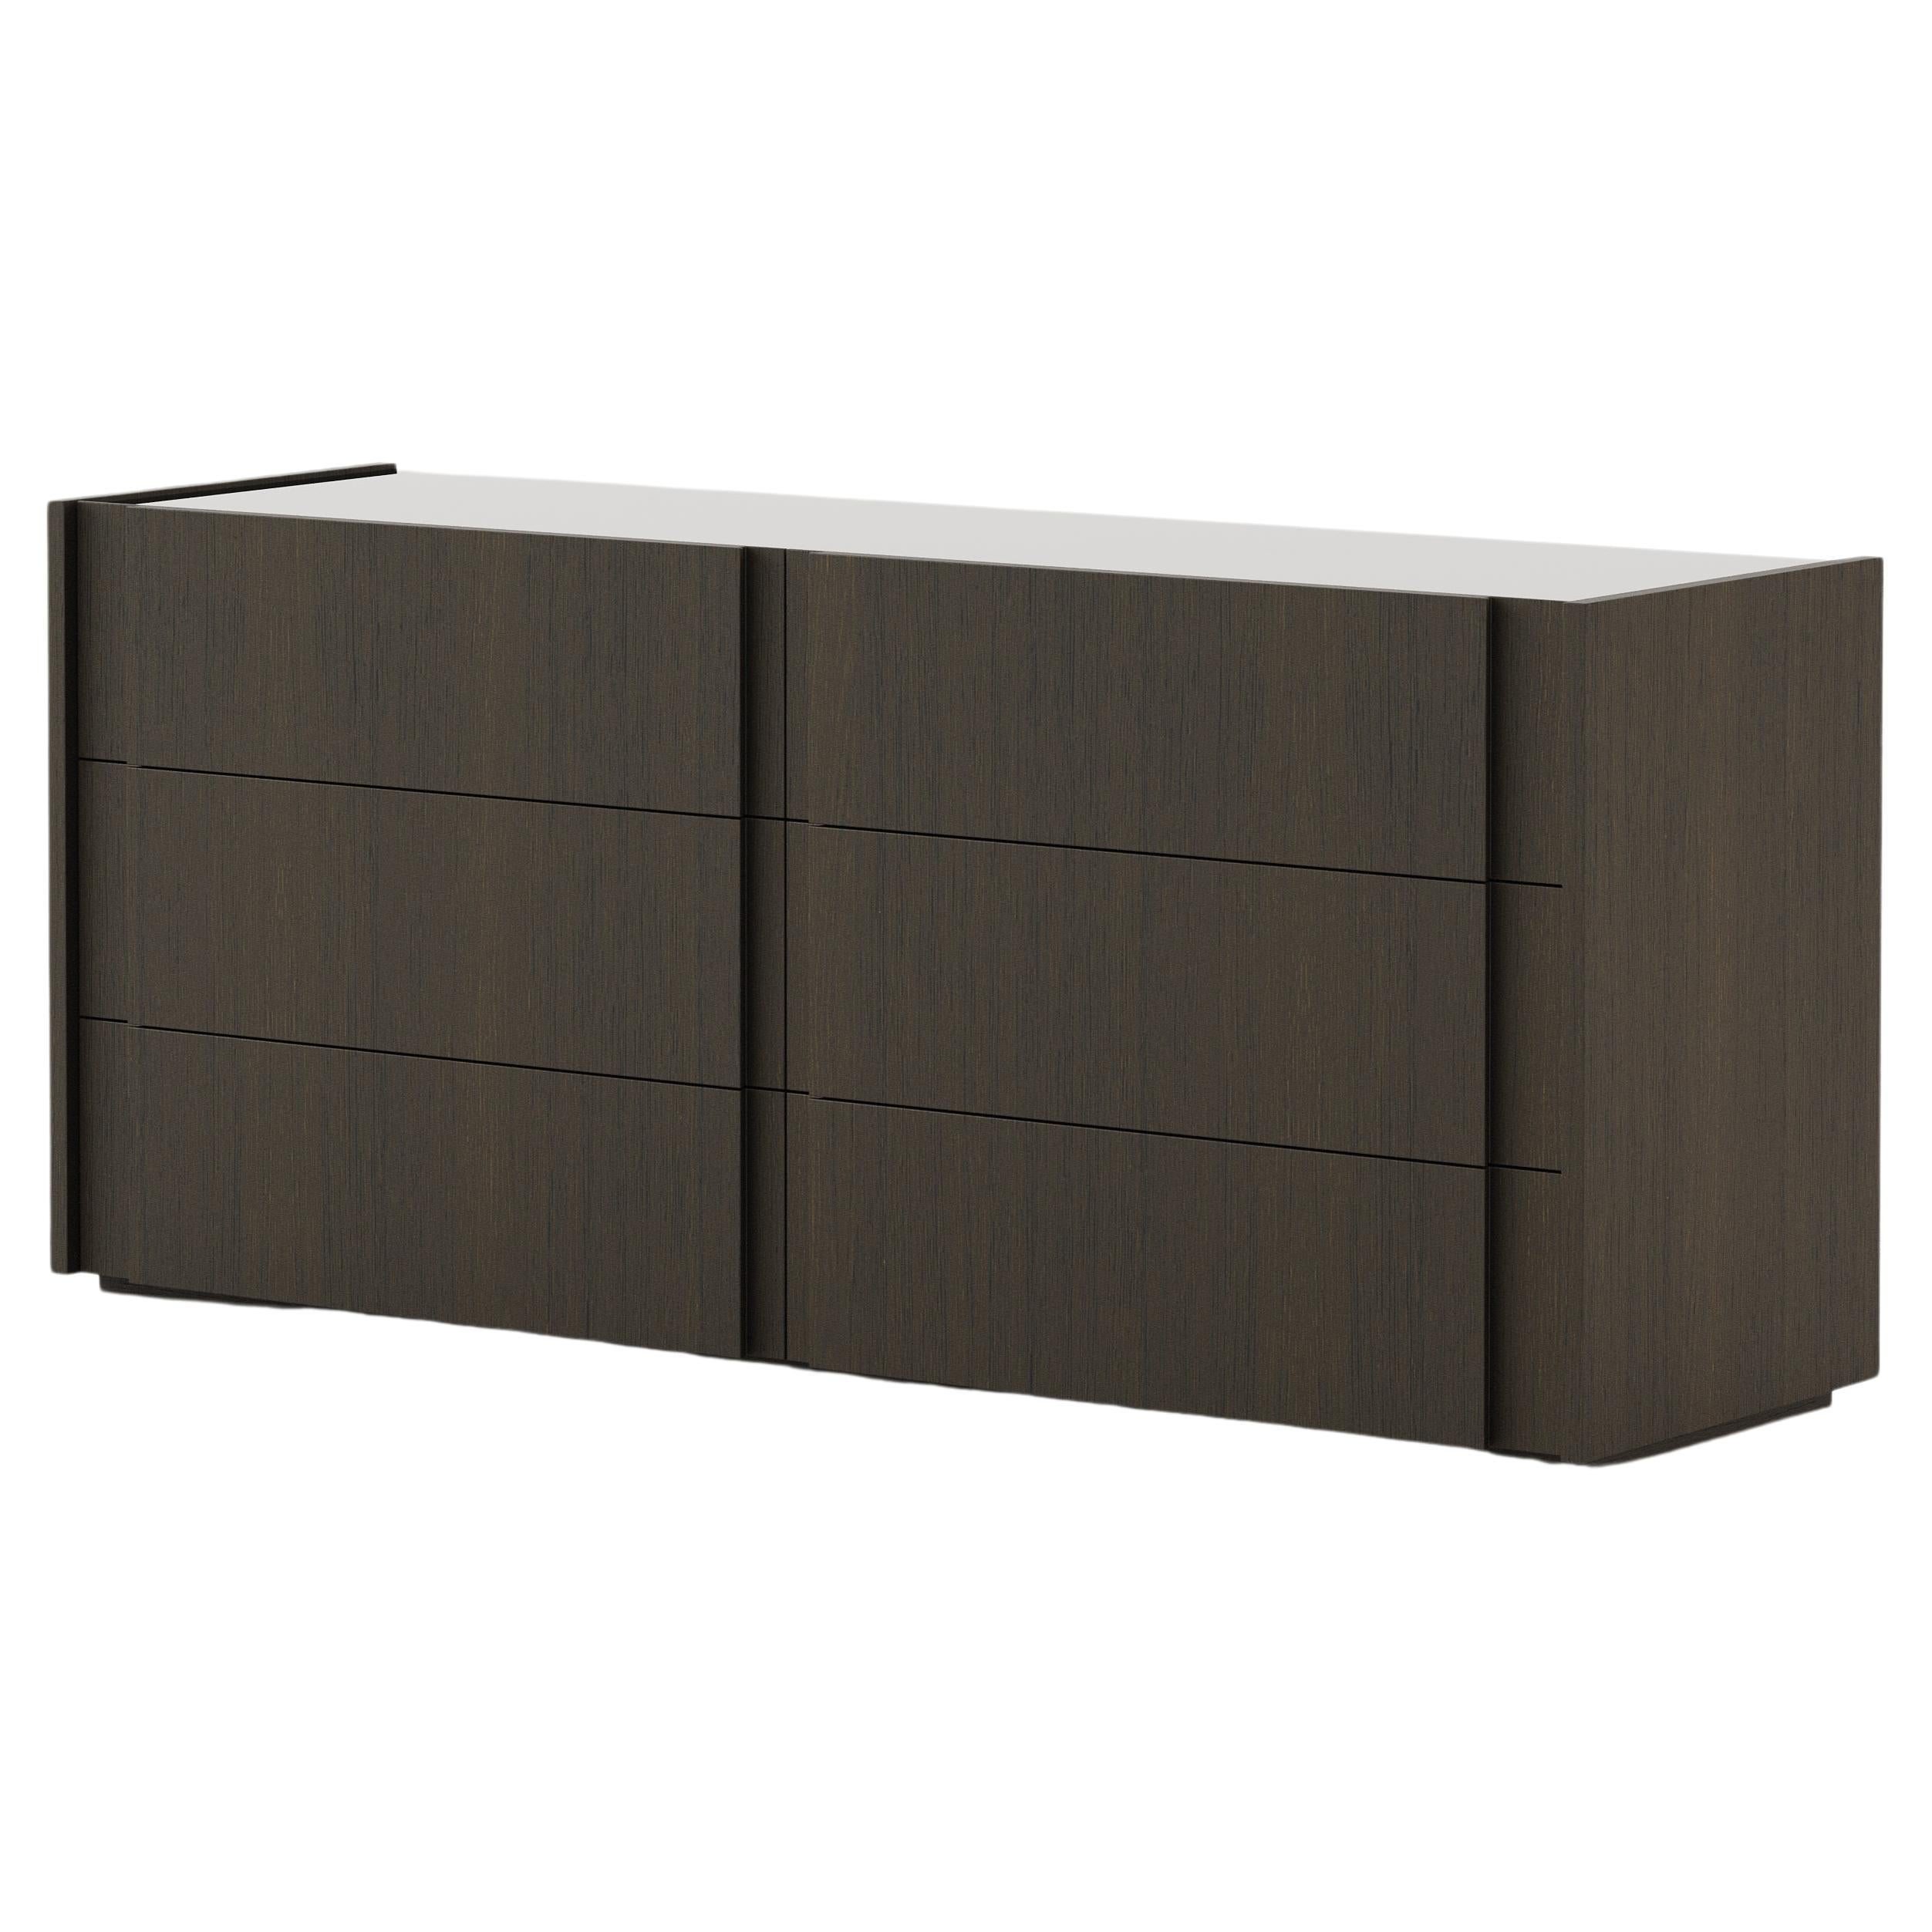 Modern Sevilha Chest of Drawers Made With Oak and Glass by Stylish Club